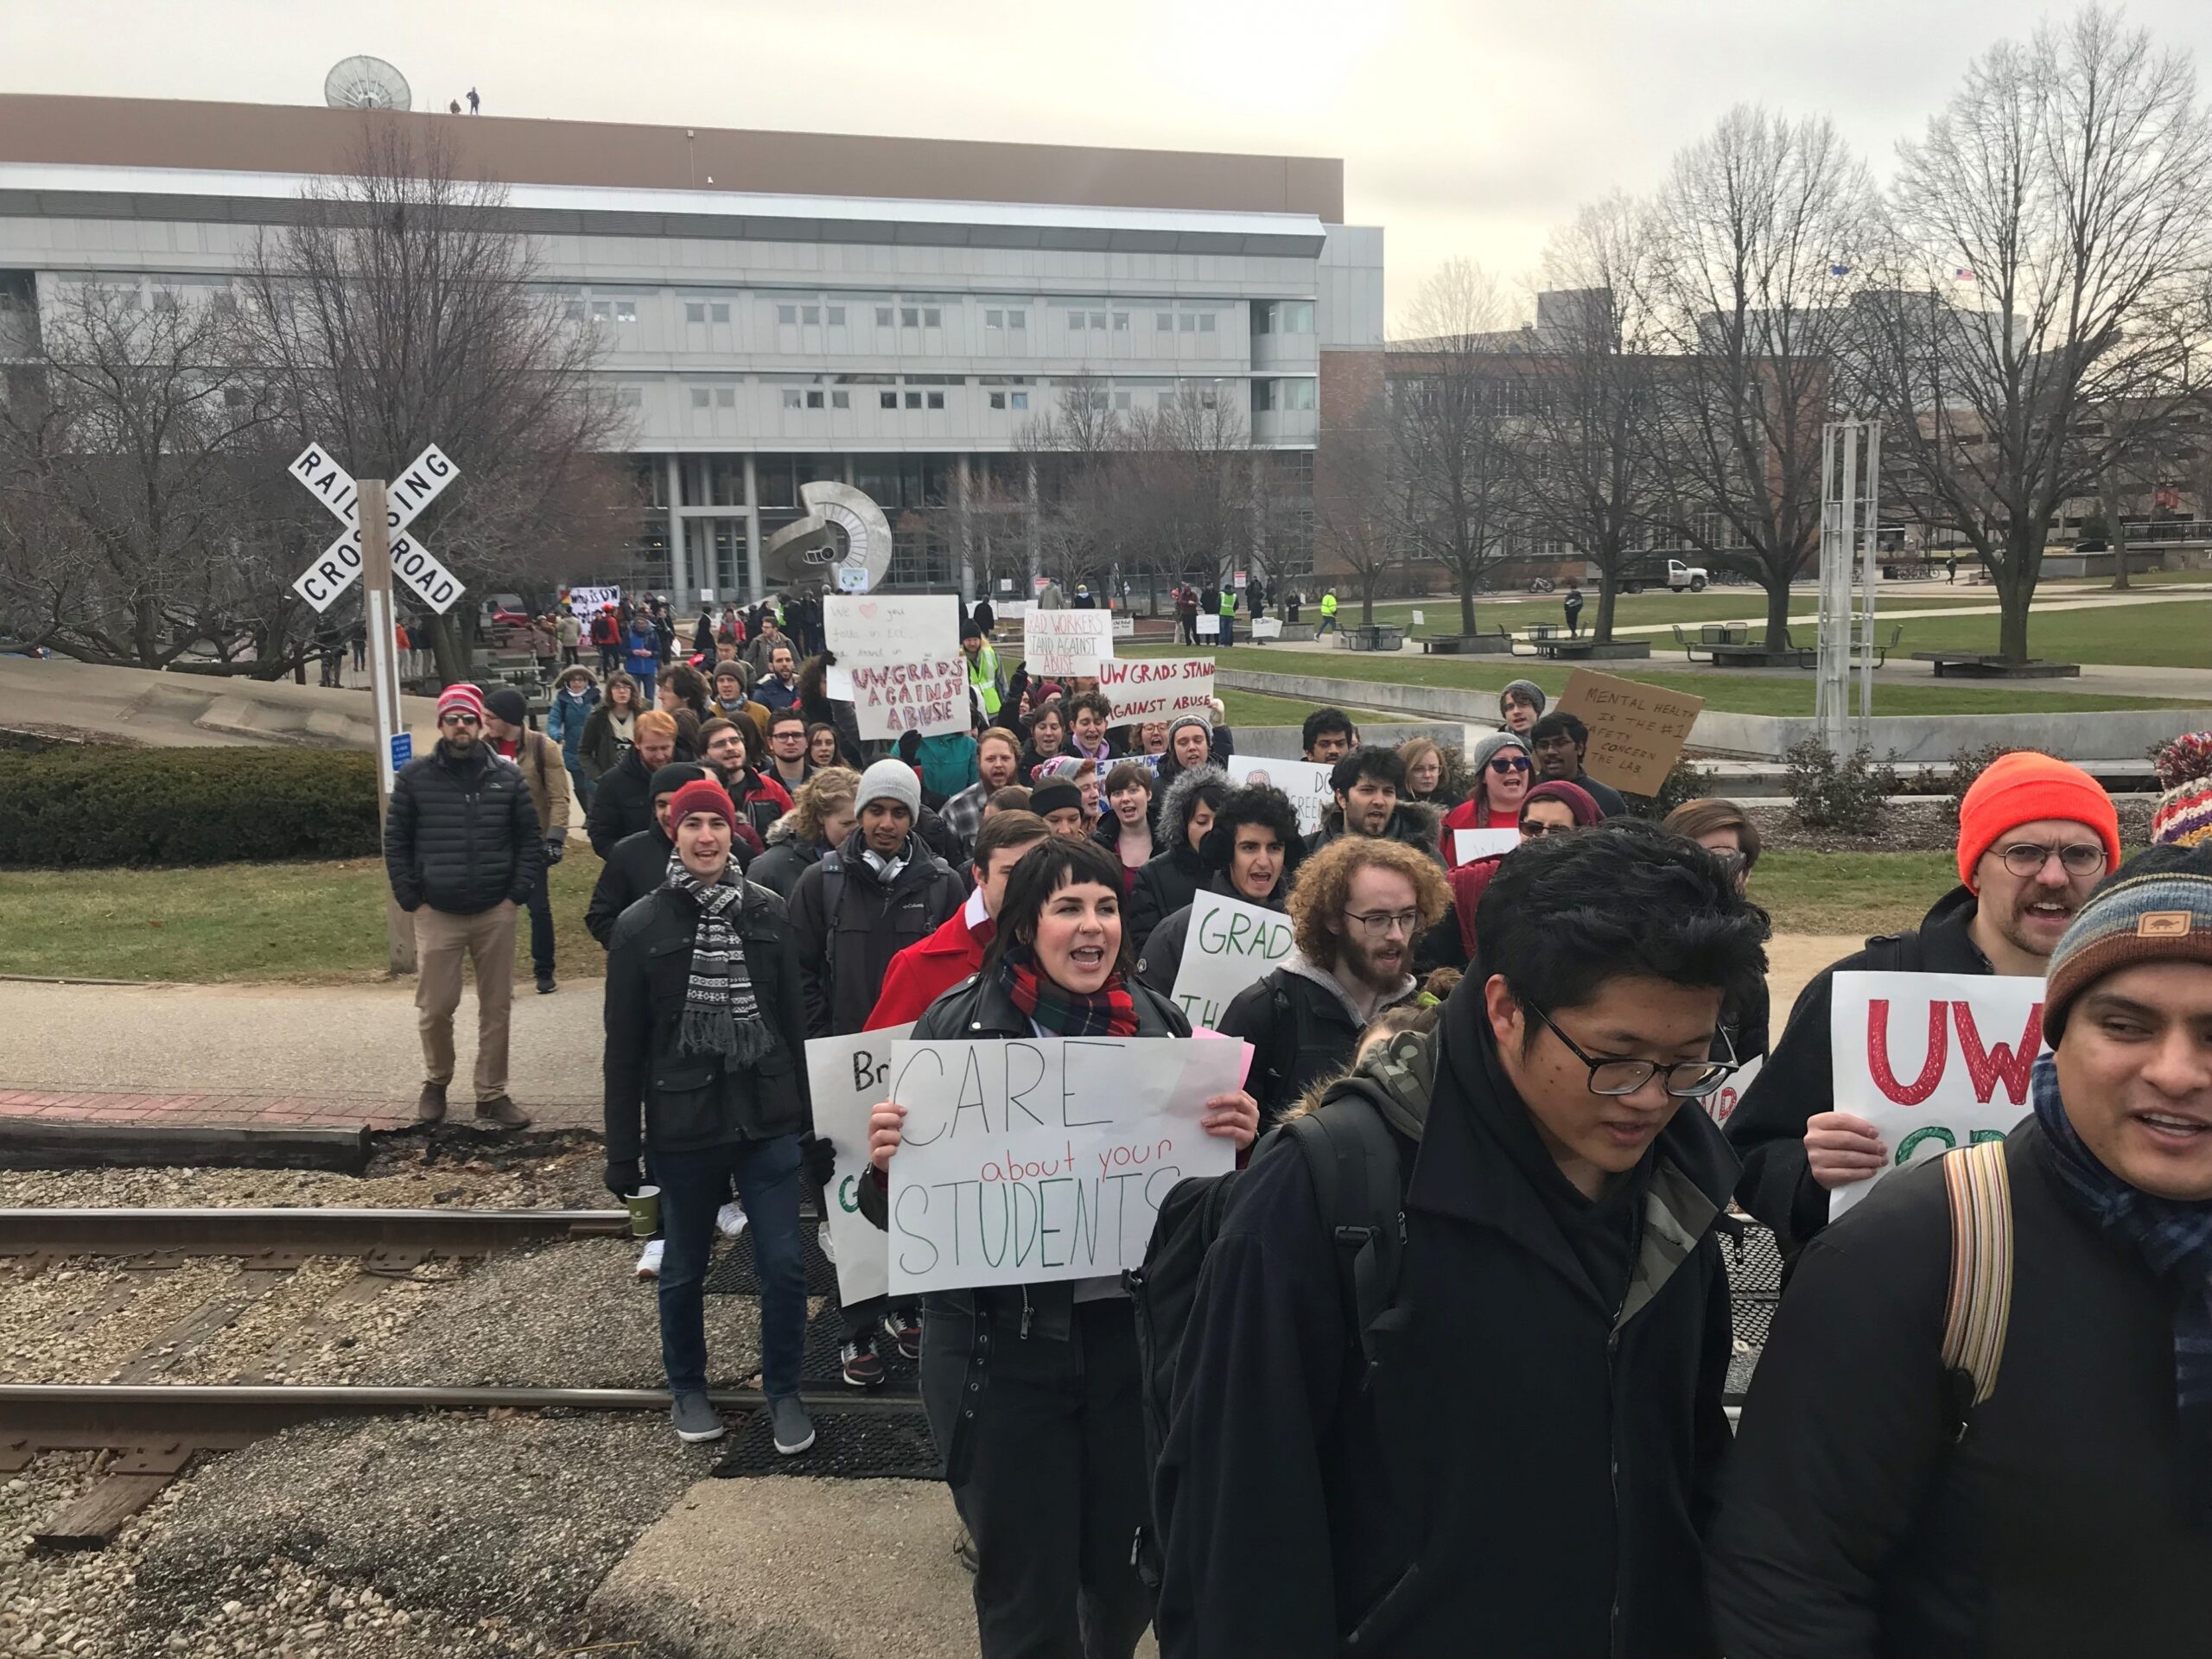 Protestors march across train tracks, holding signs calling for the university to take better care of its students.